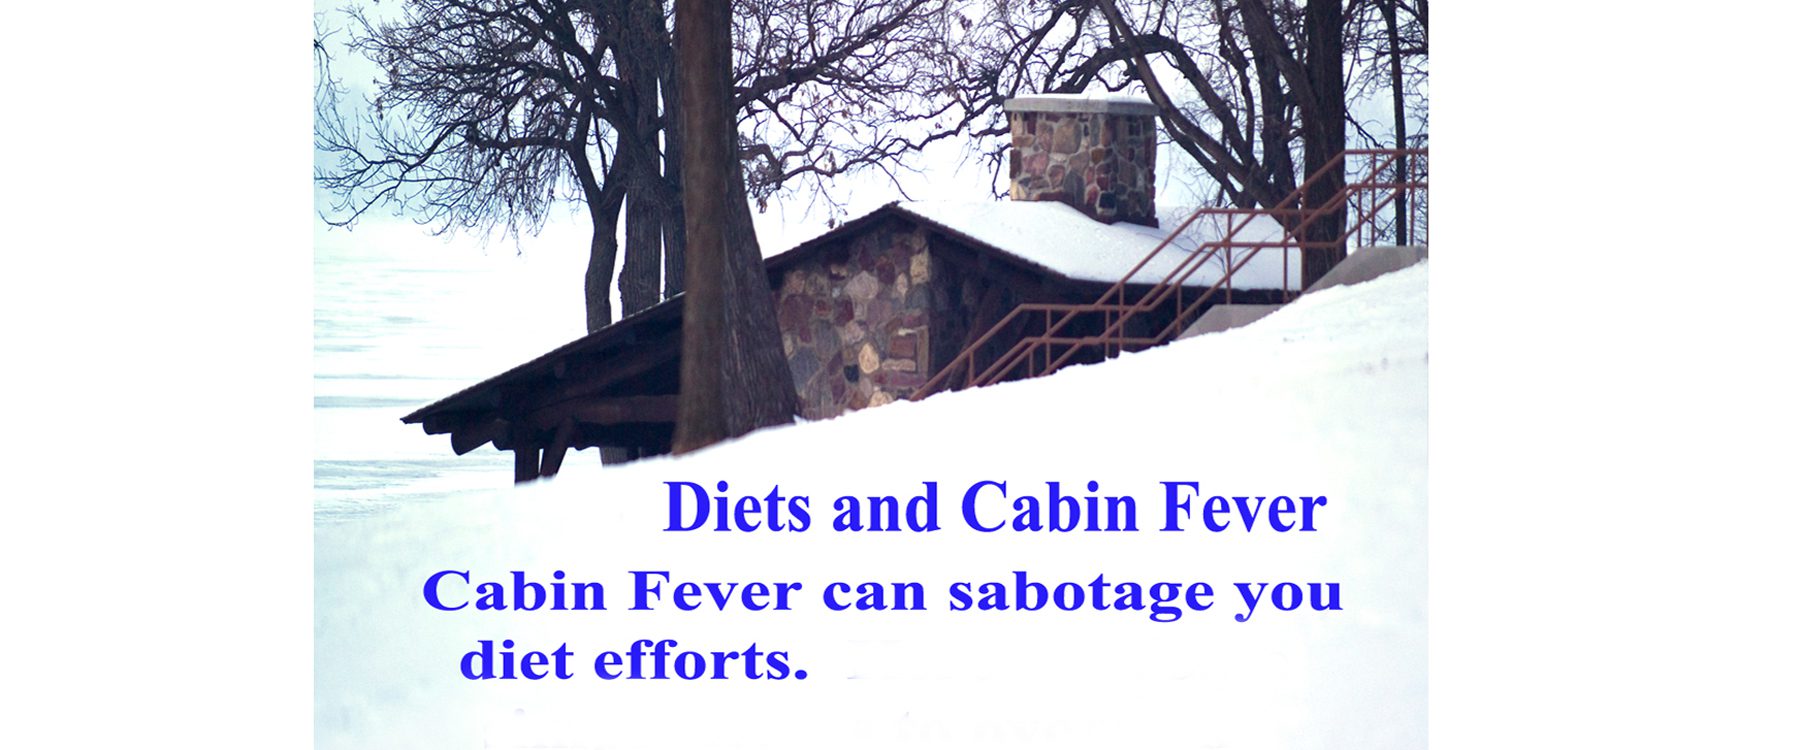 Diets and cabin fever ed 1 banner